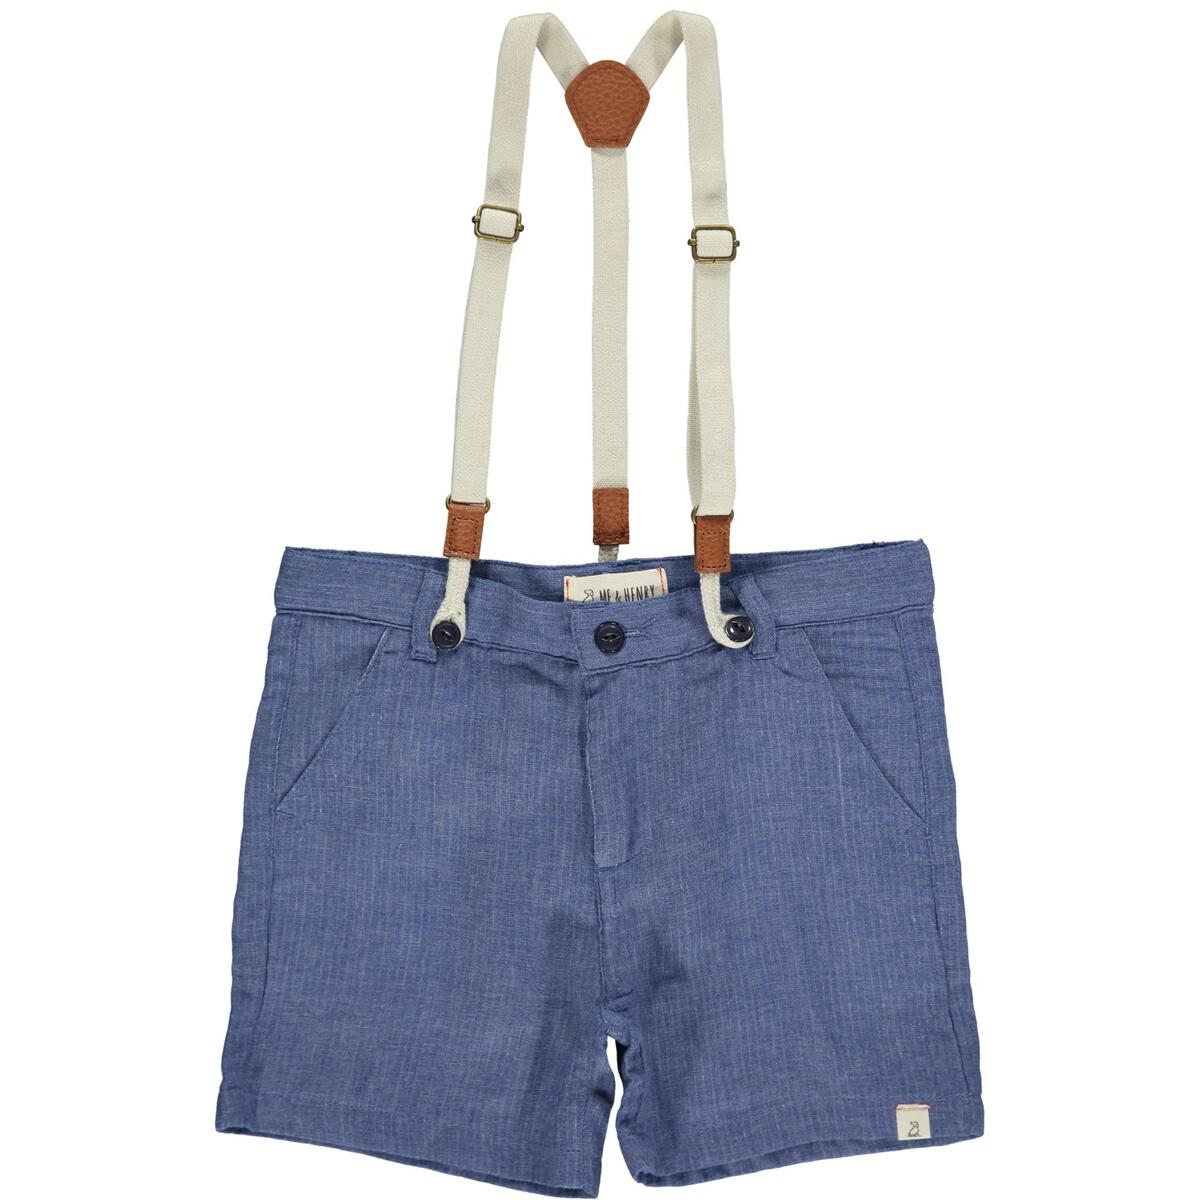 Captain Shorts with Suspenders - blue